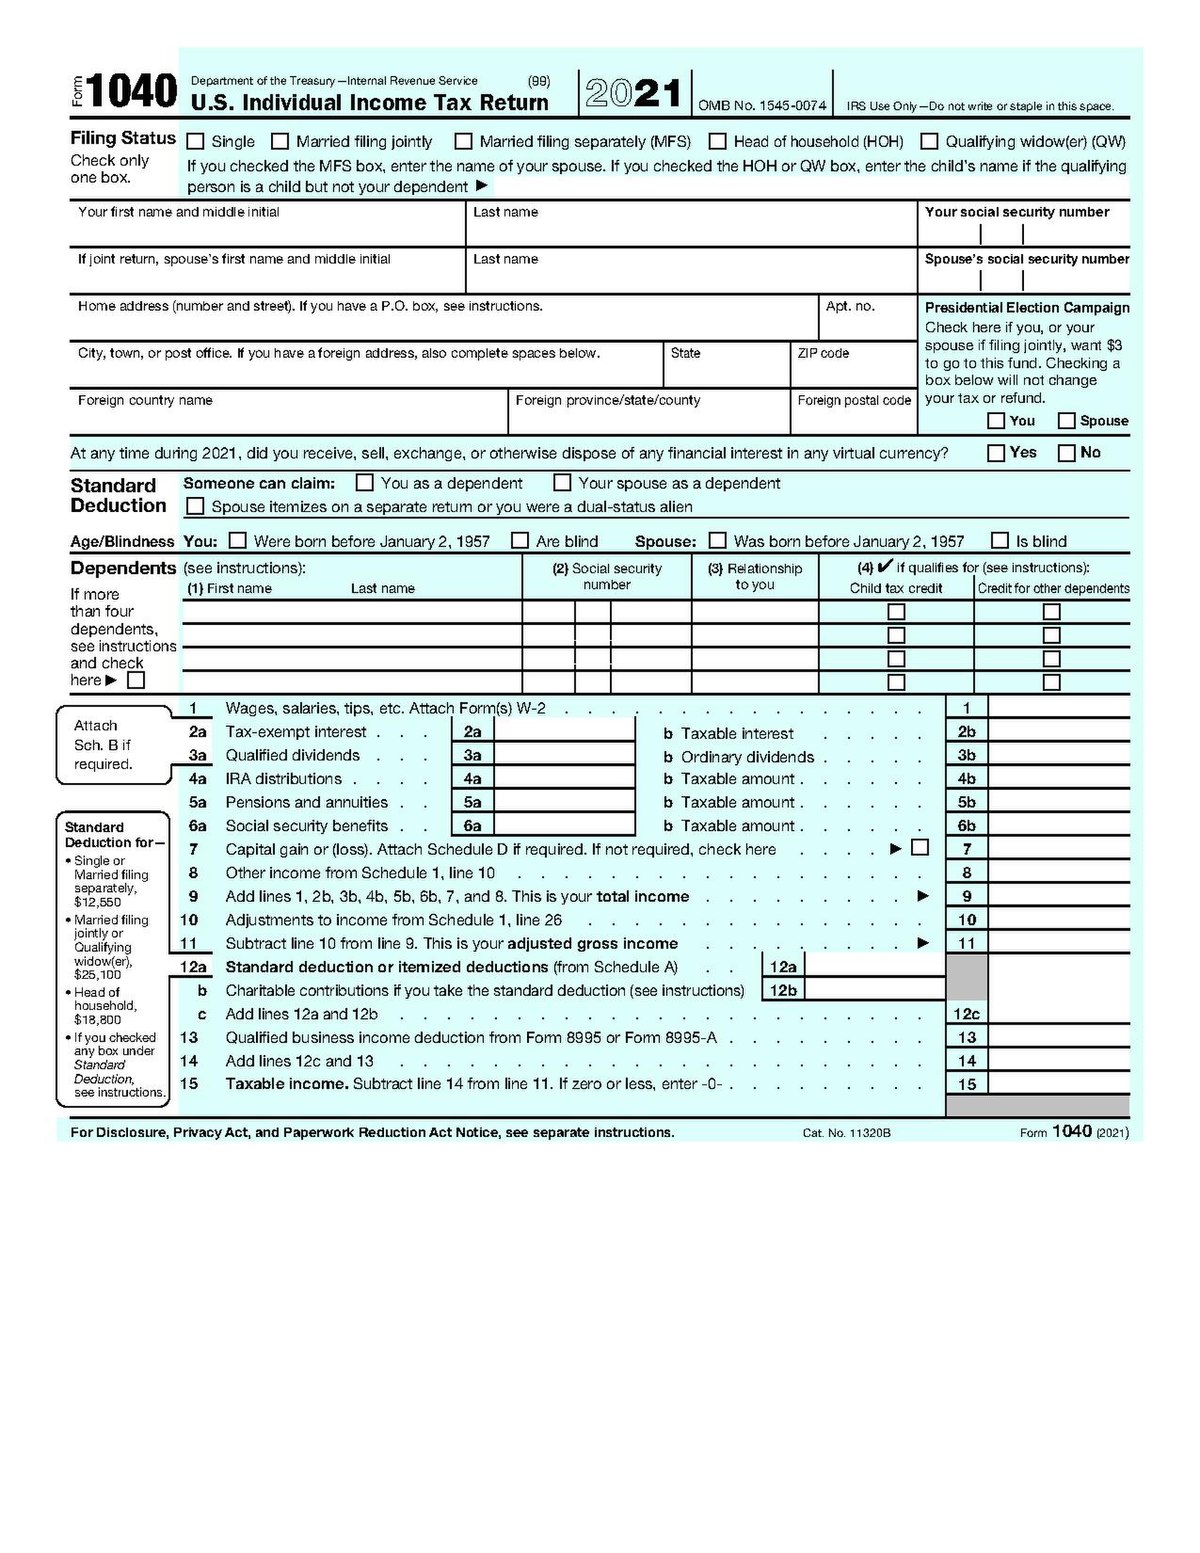 Tax forms and documents